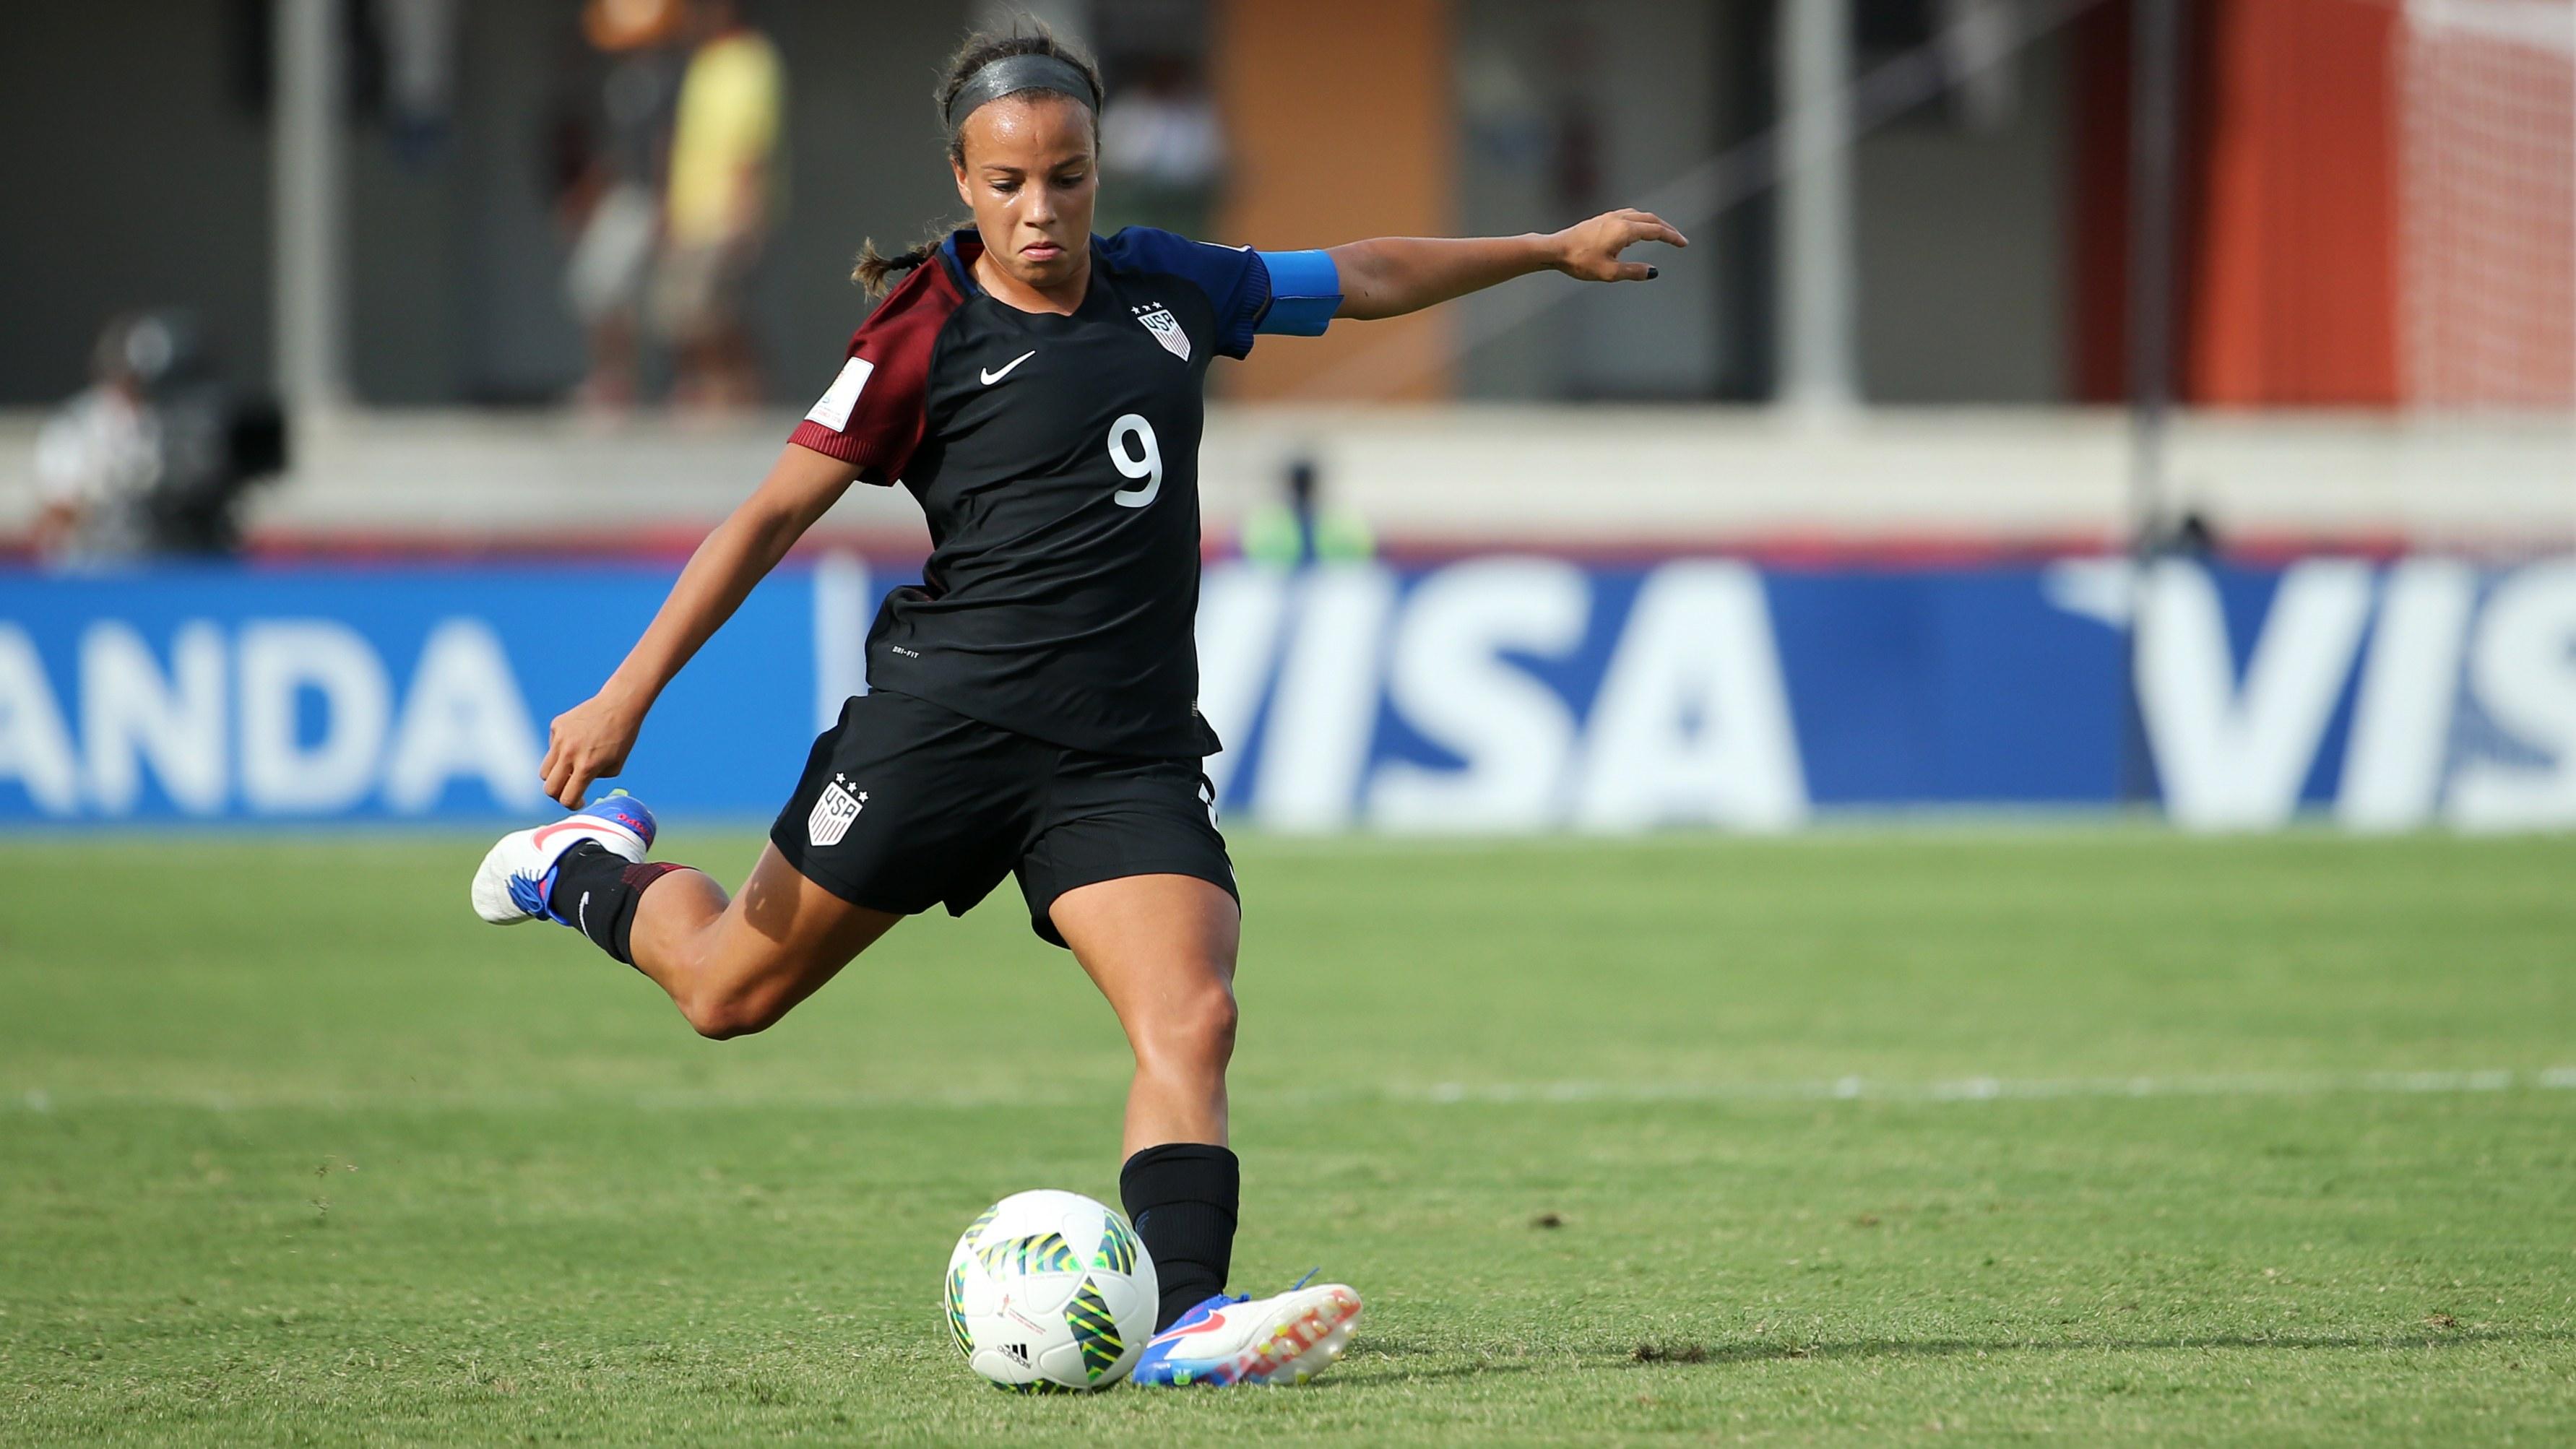 This Teenage Soccer Player Is Being Called the Next Mia Hamm